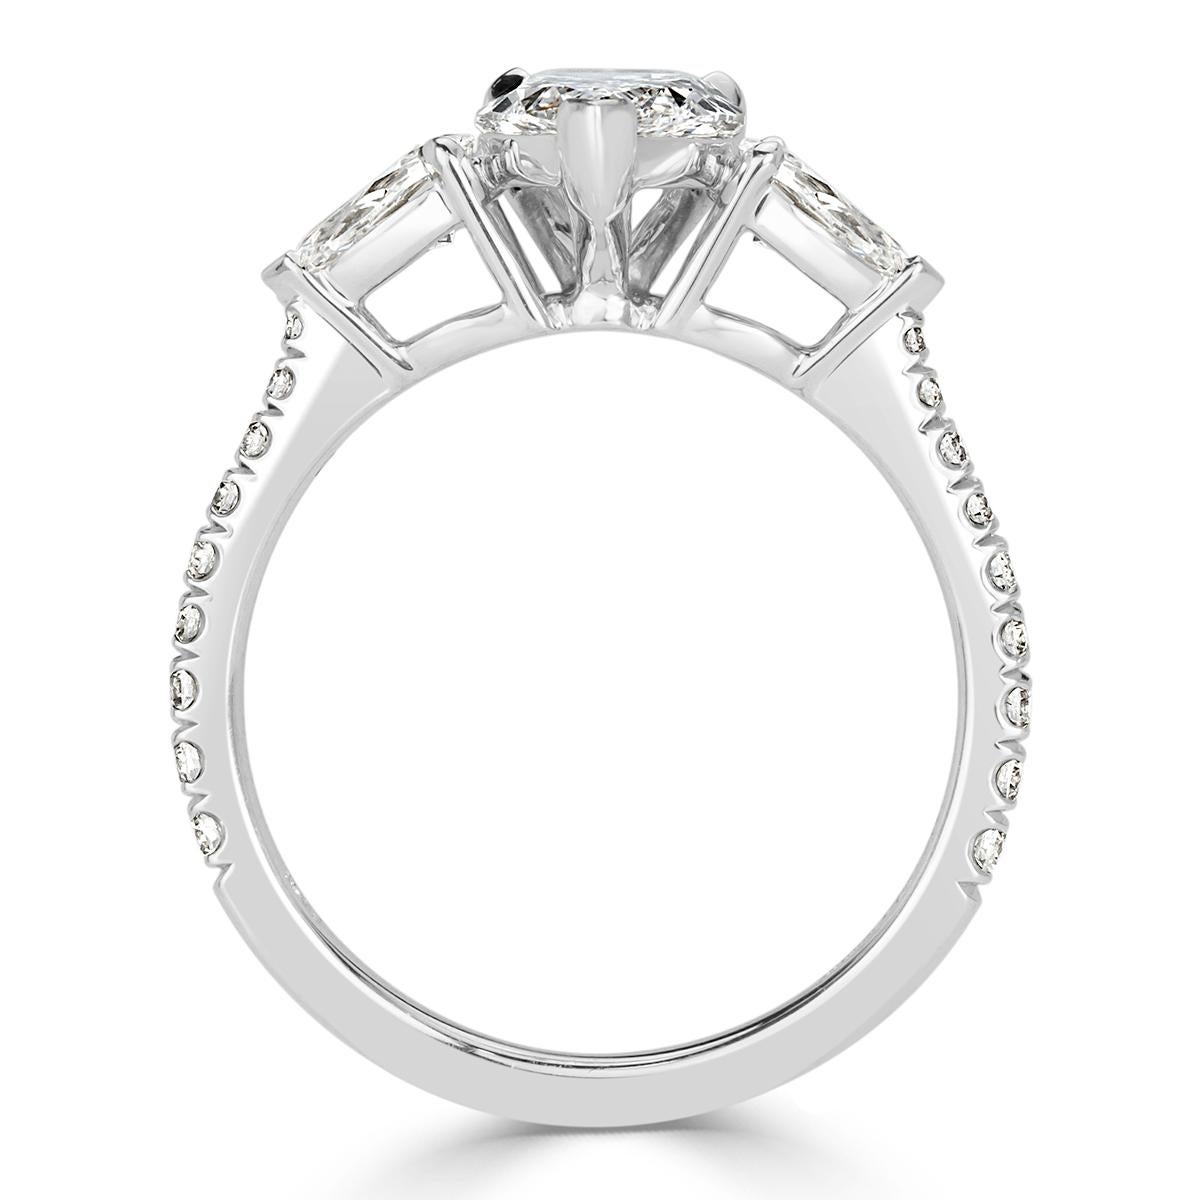 This delightful diamond engagement ring showcases a stunning 1.21ct pear shaped center diamond, GIA certified at D in color, VVS1 in clarity.It is exceptionally white and clear with amazing measurements of 10.64 x 6.37 mm which allows this gem to